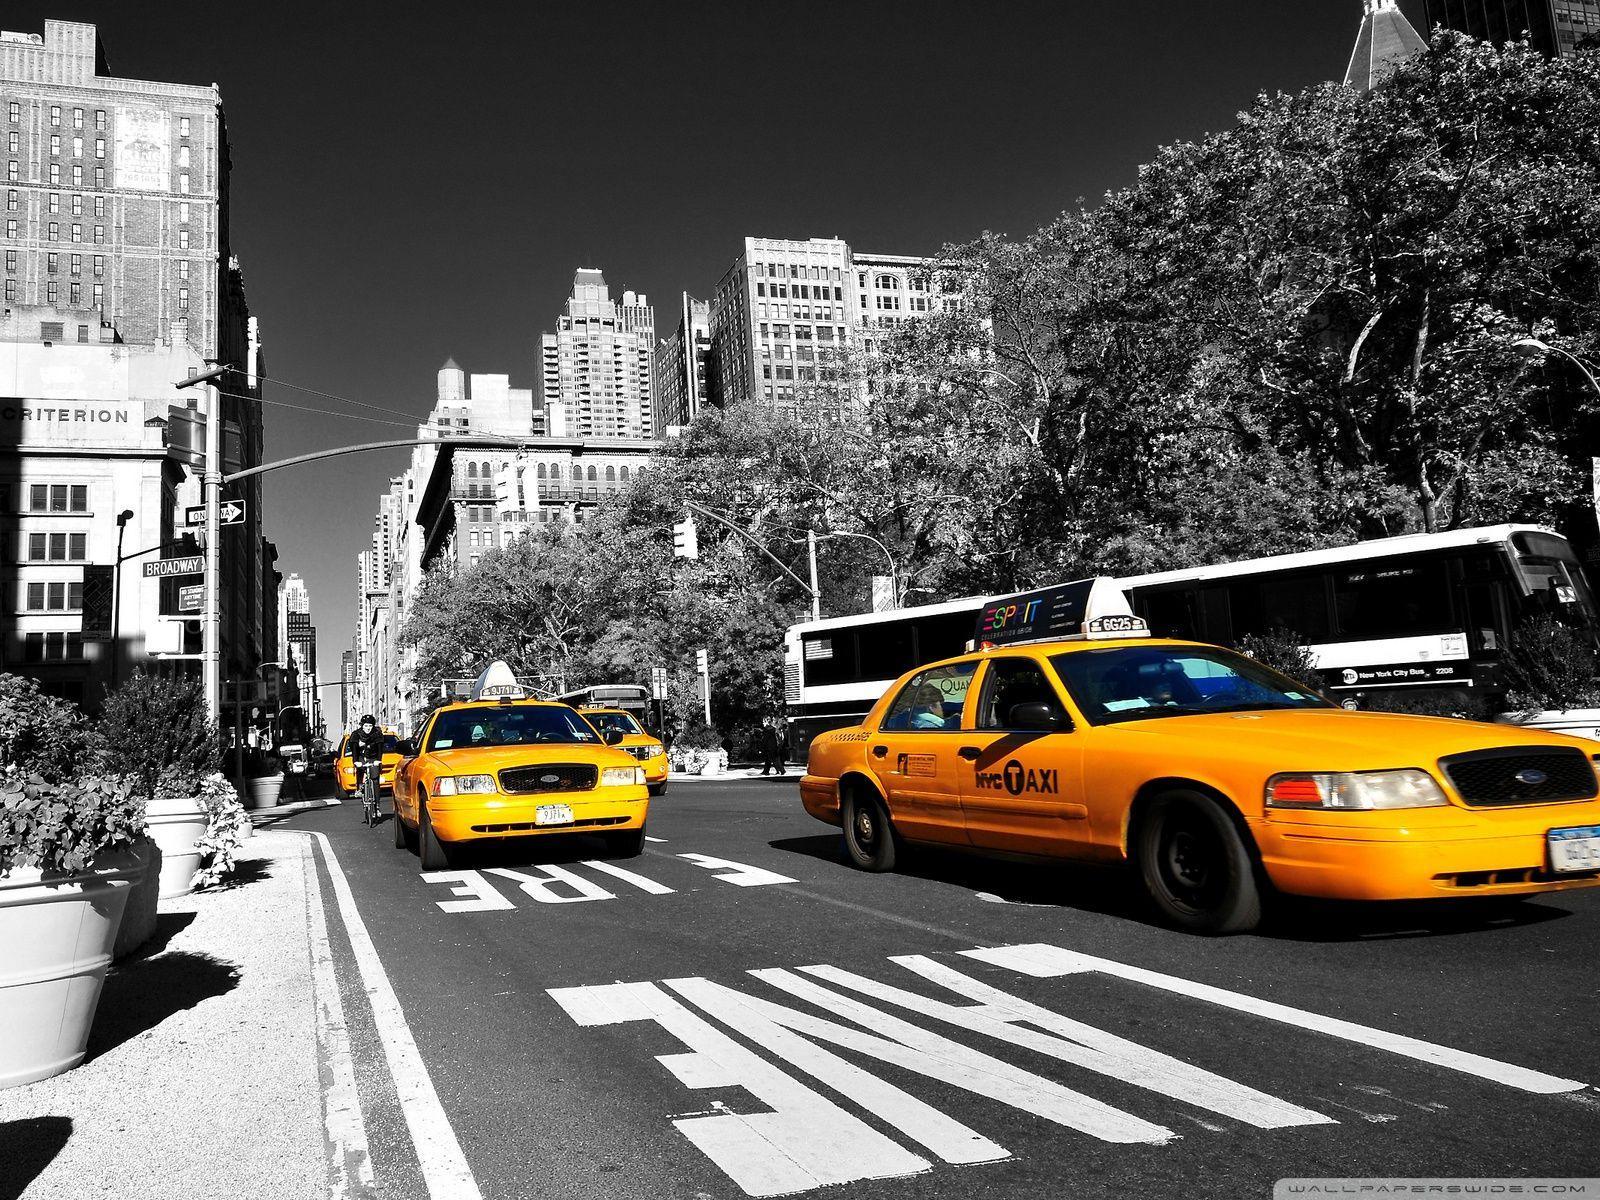 100+ Free Taxi Cab & Taxi Images - Pixabay